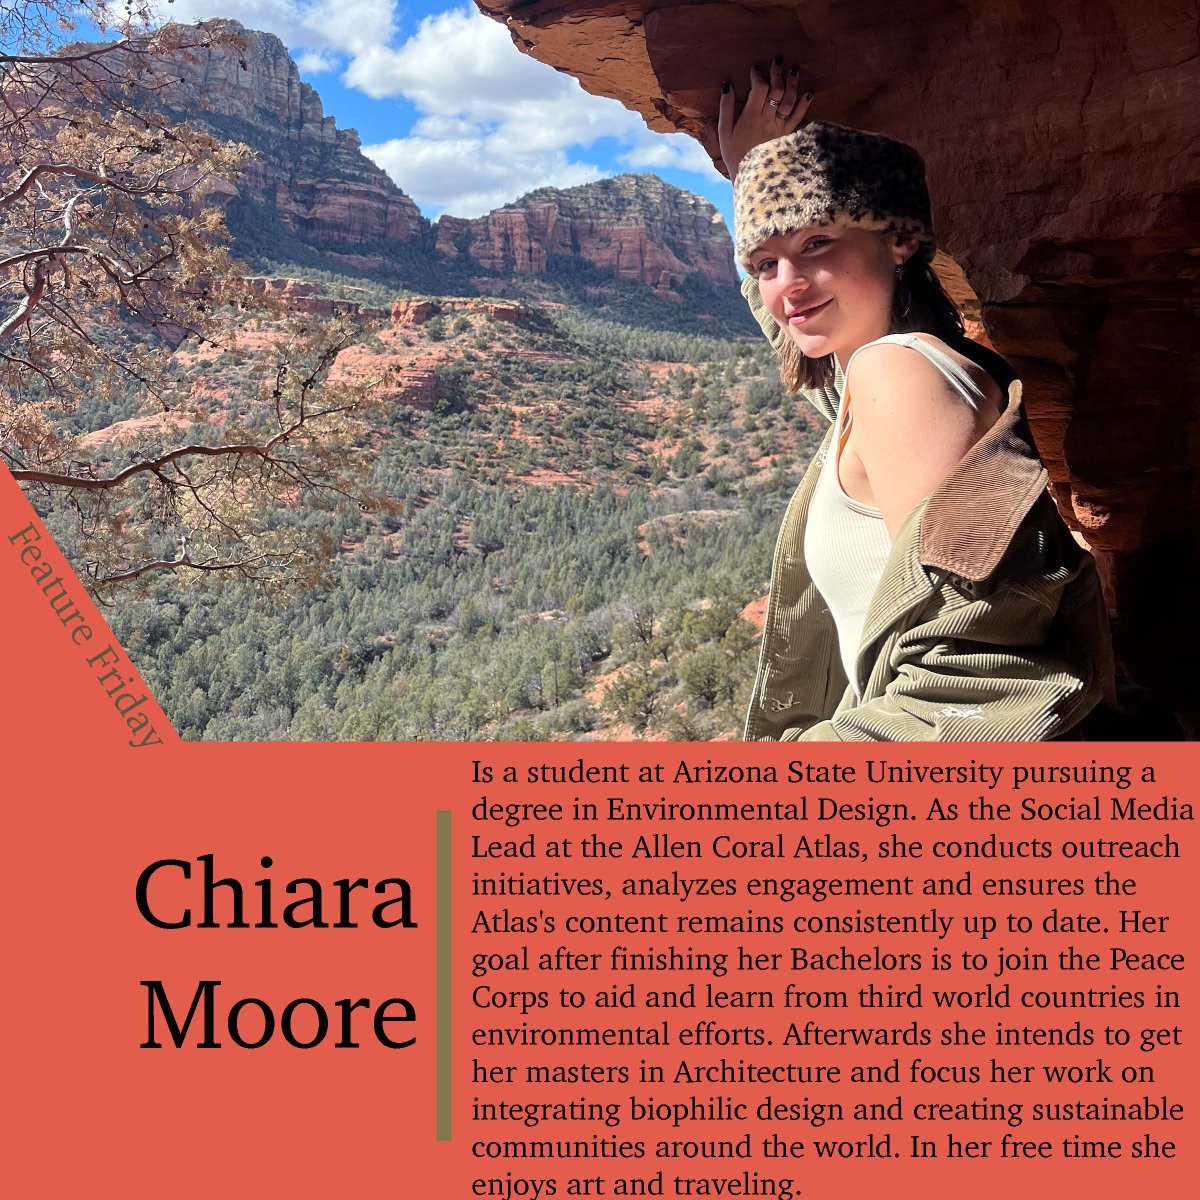 #featurefriday with Chiara Moore